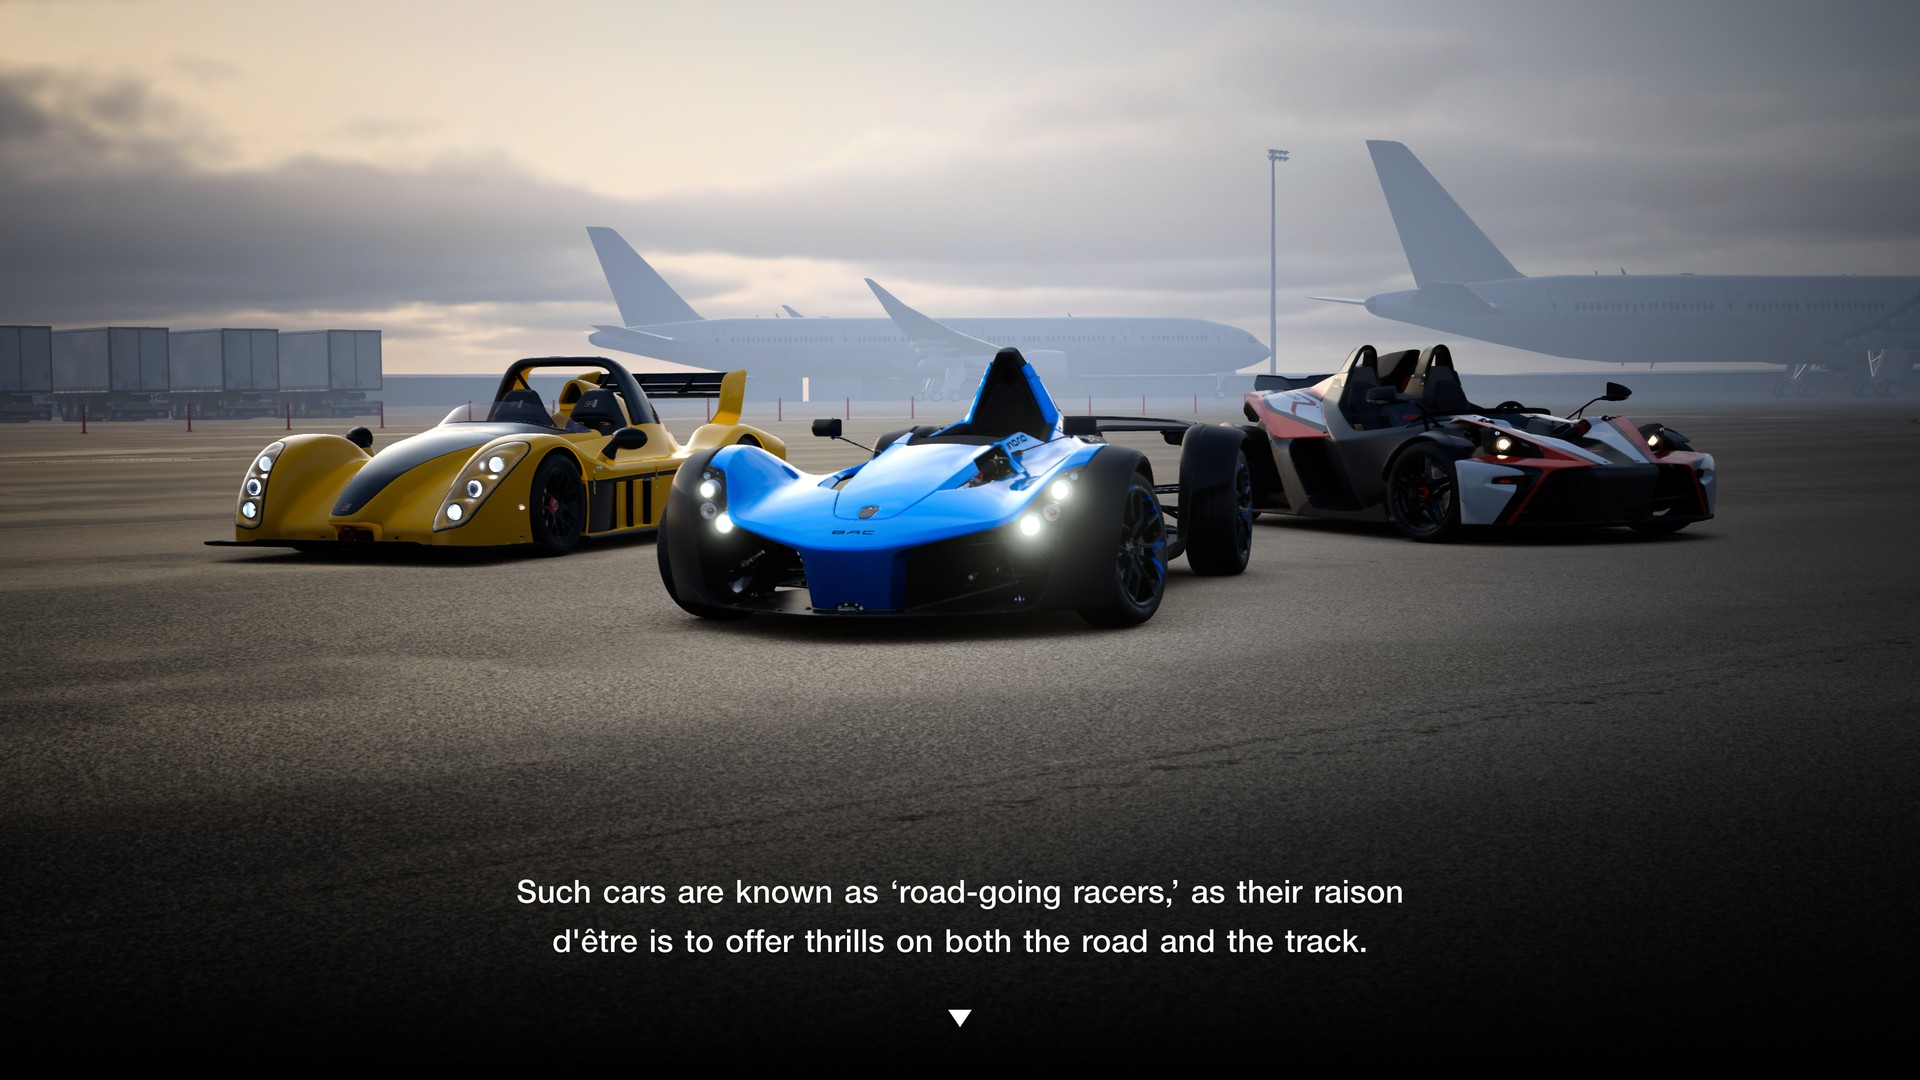 Gran Turismo 7 Coming to PS5, Gorgeous Vehicles Shown, In-Depth Campaign  Hinted At